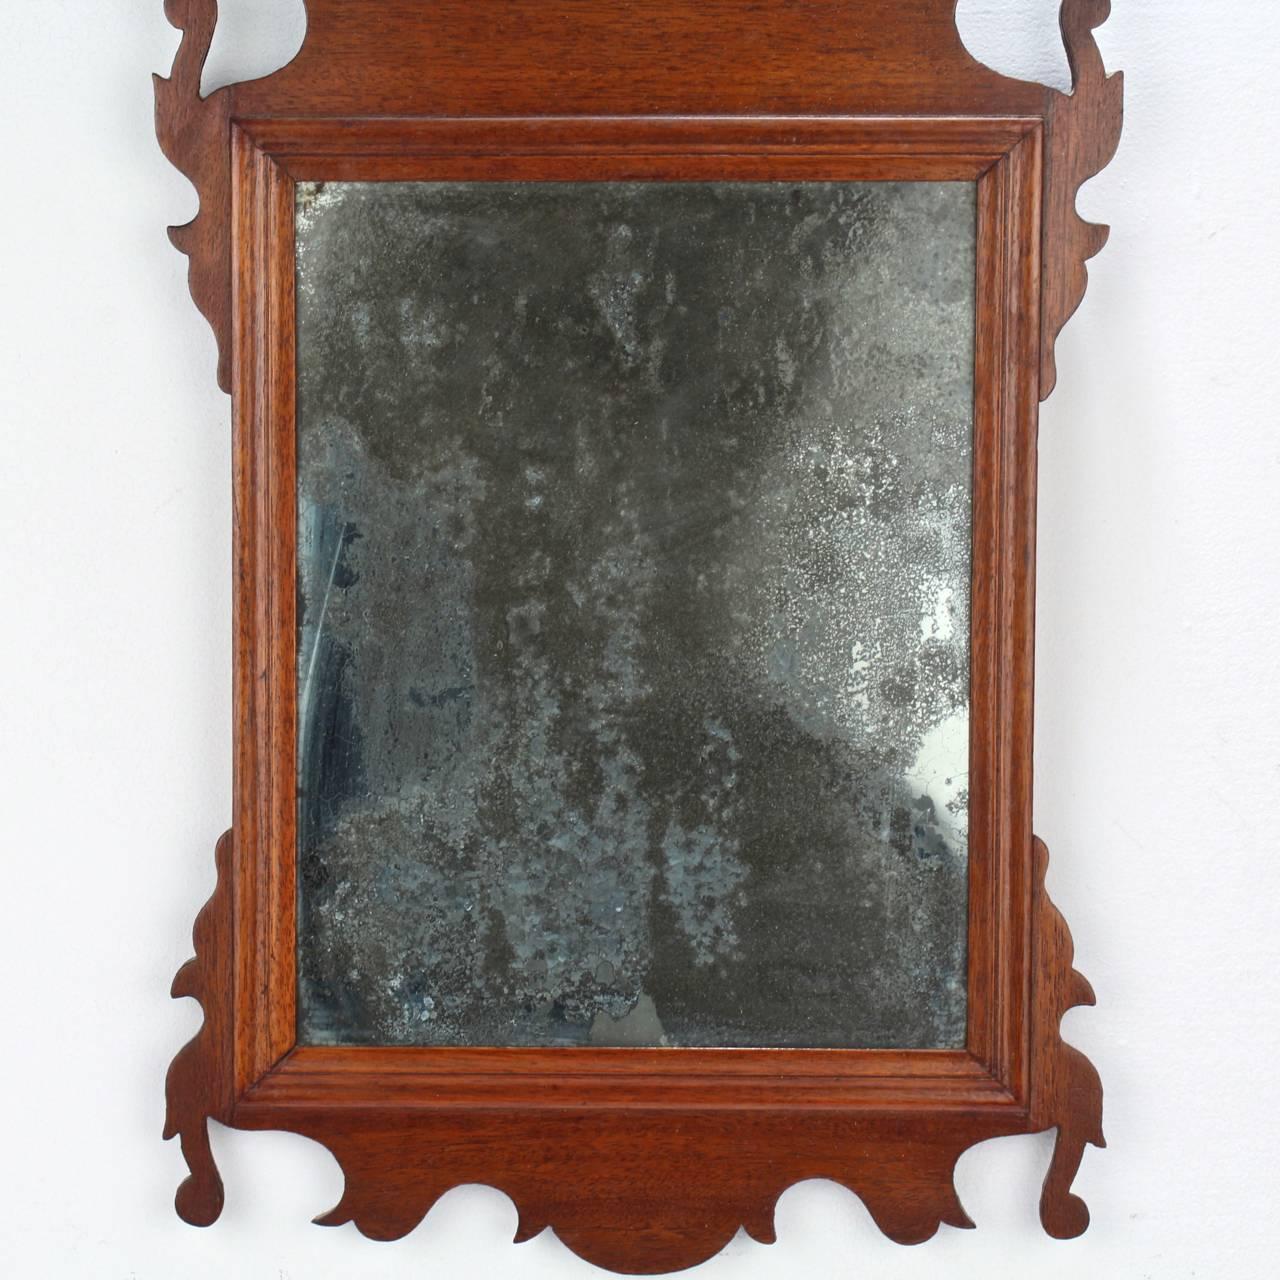 Diminutive 18th Century Mahogany Chippendale Mirror or Looking Glass 1